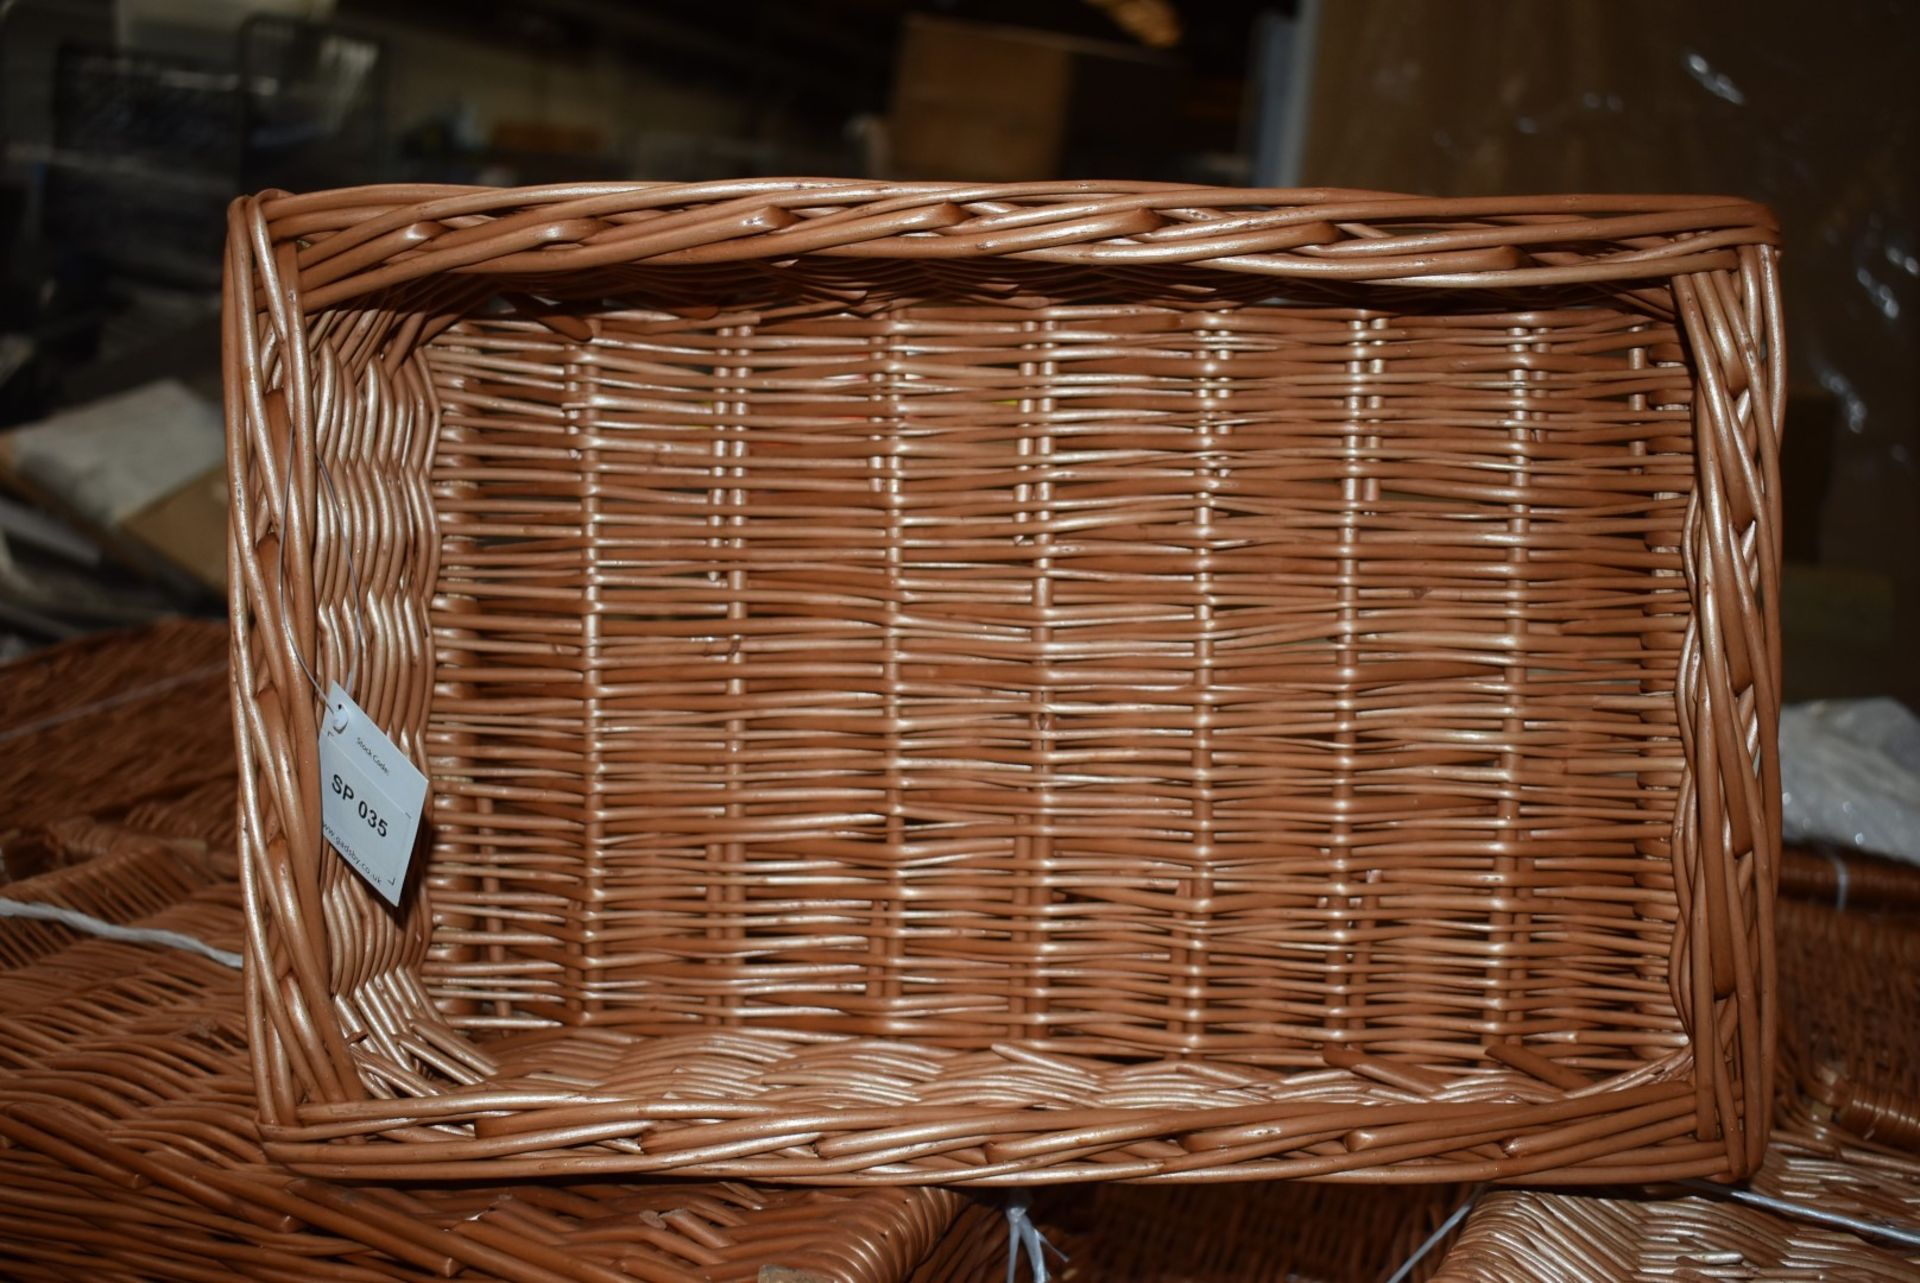 8 x Hand Woven Retail Display Sloping Wicker Baskets - Ideal For Presentation in Wide Range of - Image 10 of 10